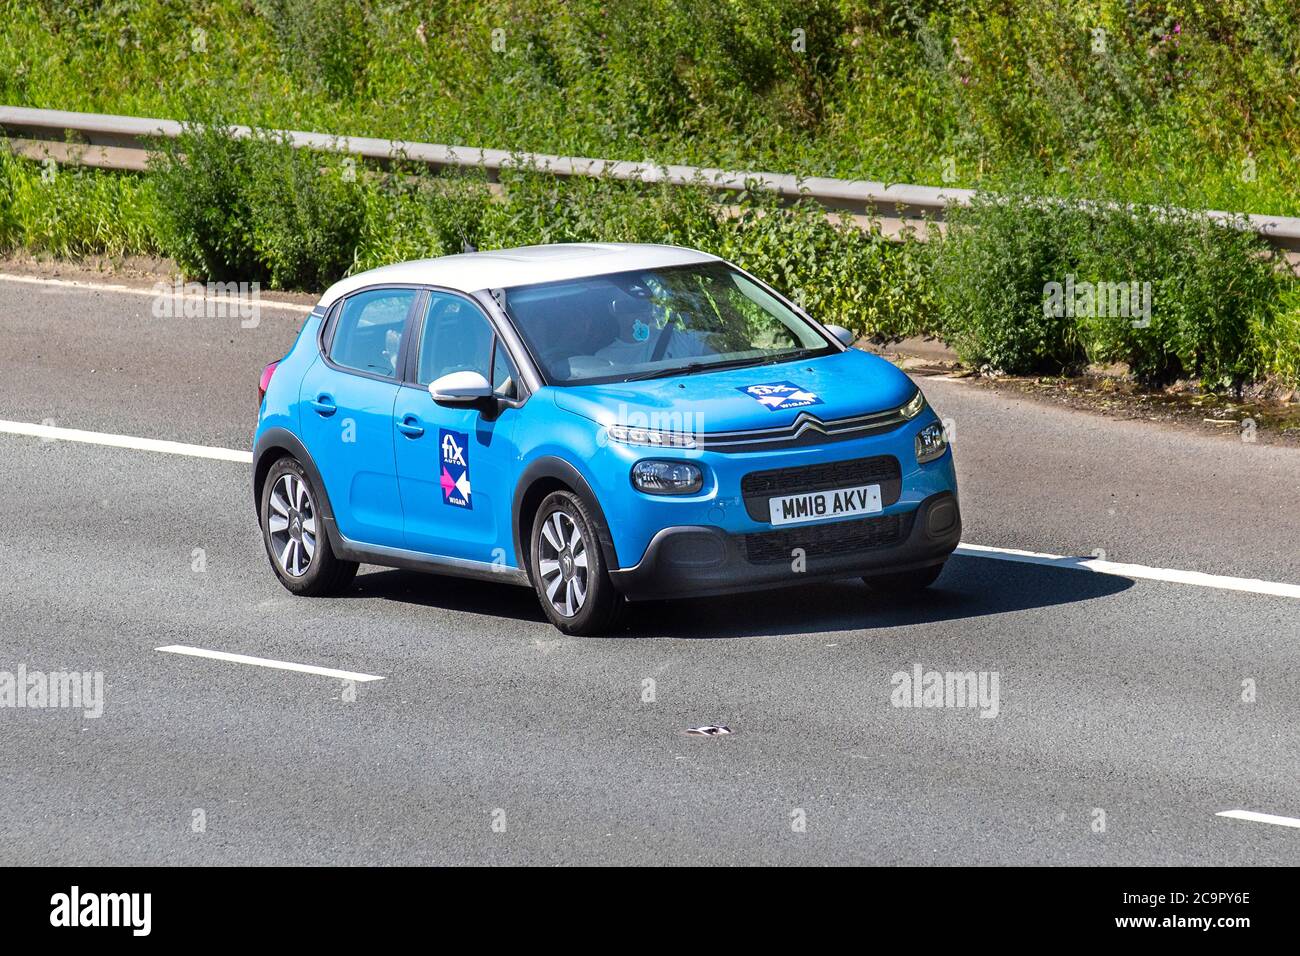 FIX AUTO Wigan 2019 blue Citroën C3 Feel Puretech; Vehicular traffic moving vehicles, cars driving vehicle on UK roads, french motors, motoring on the M6 motorway highway network. Stock Photo